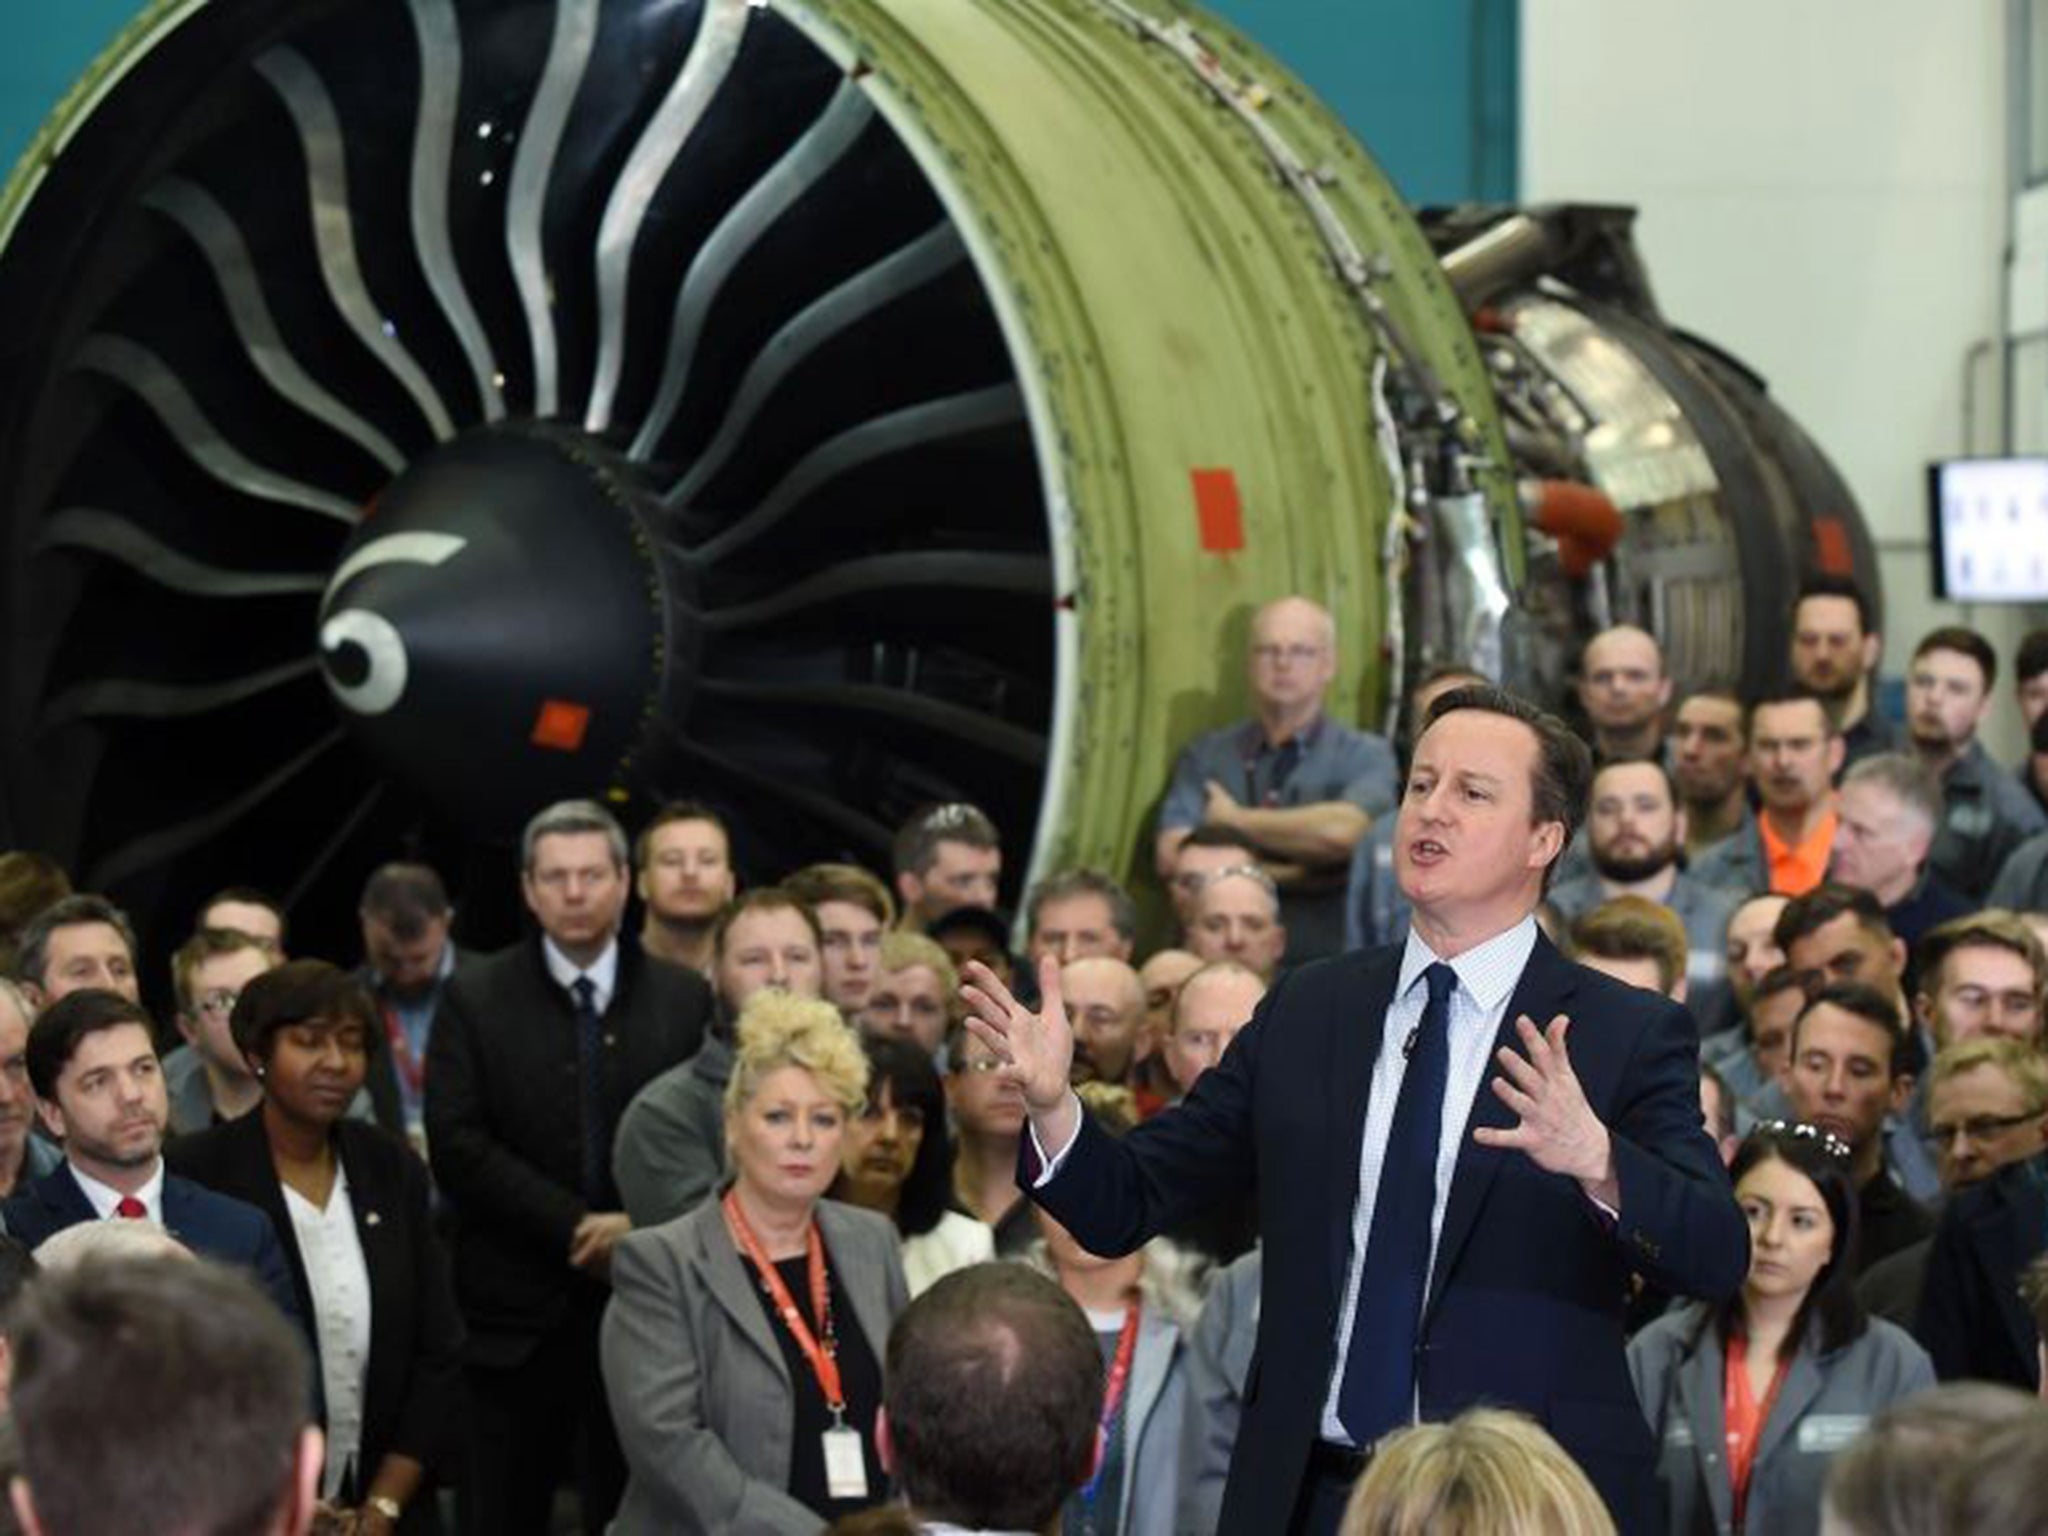 David Cameron speaks to employees during a question and answer session at GE Aviation in Cardiff yesterday